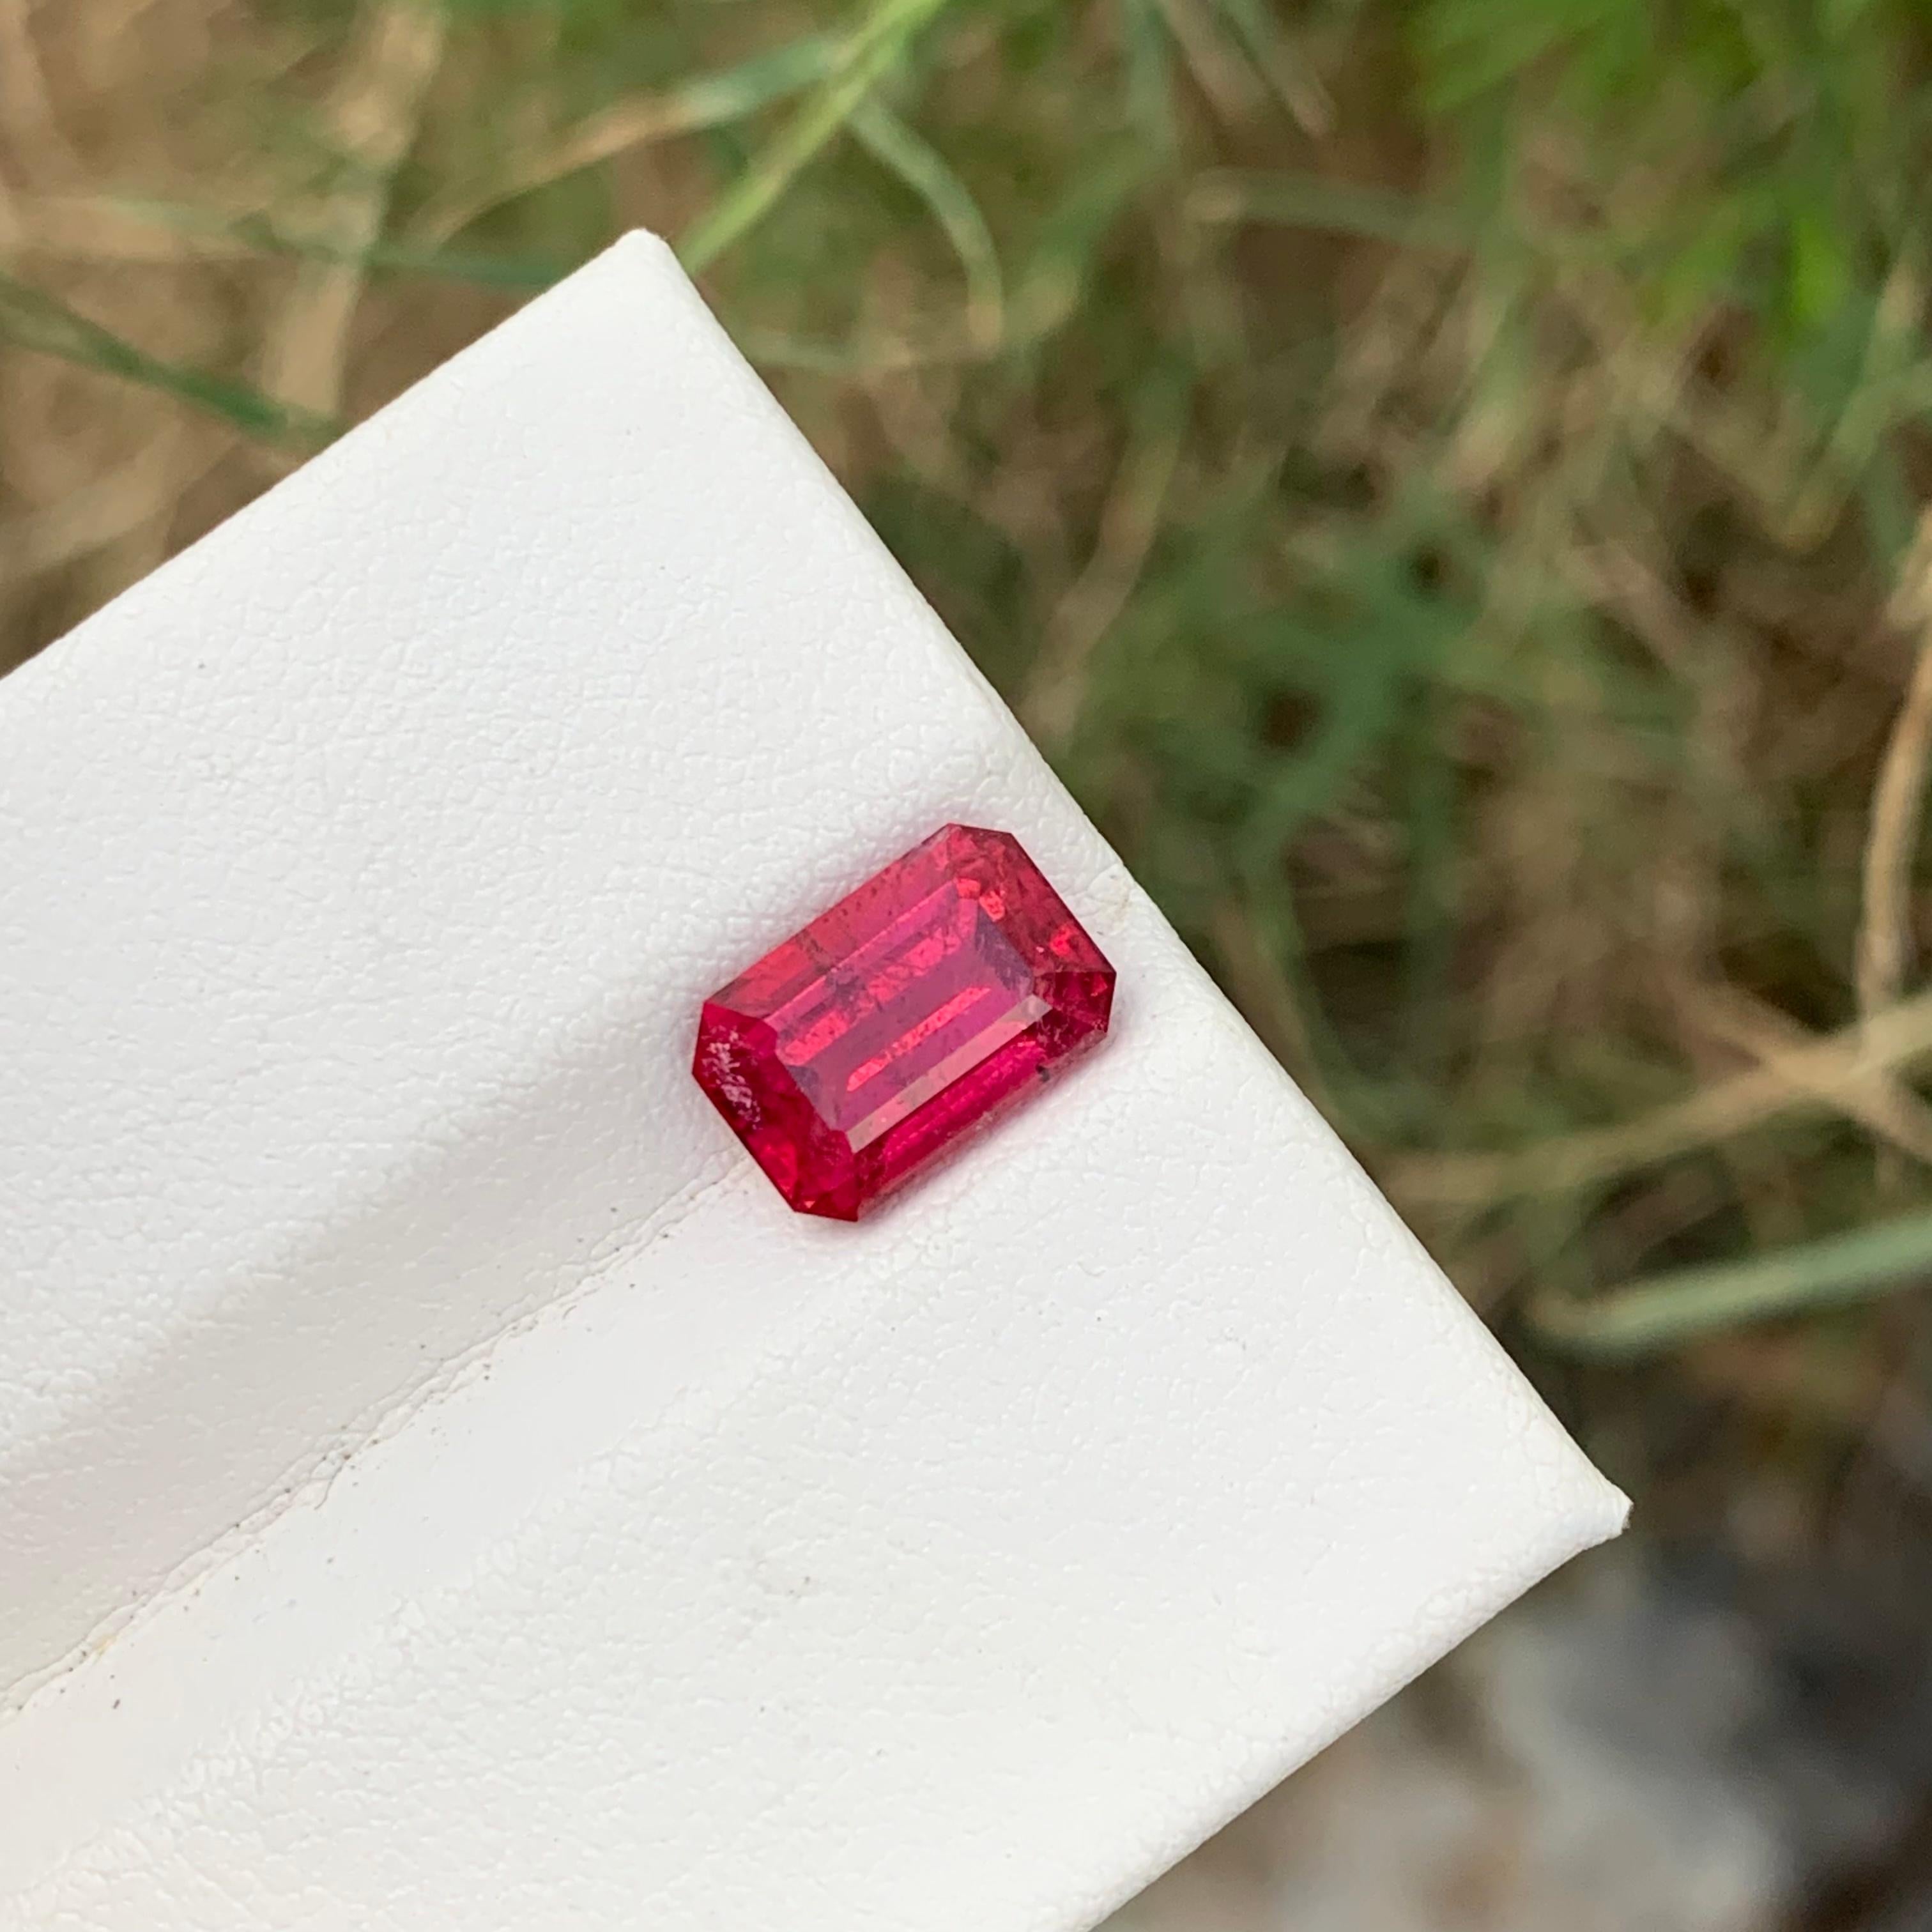 3.20 Carats Faceted Natural Rubellite Tourmaline Gemstone Emerald Shape For Sale 3